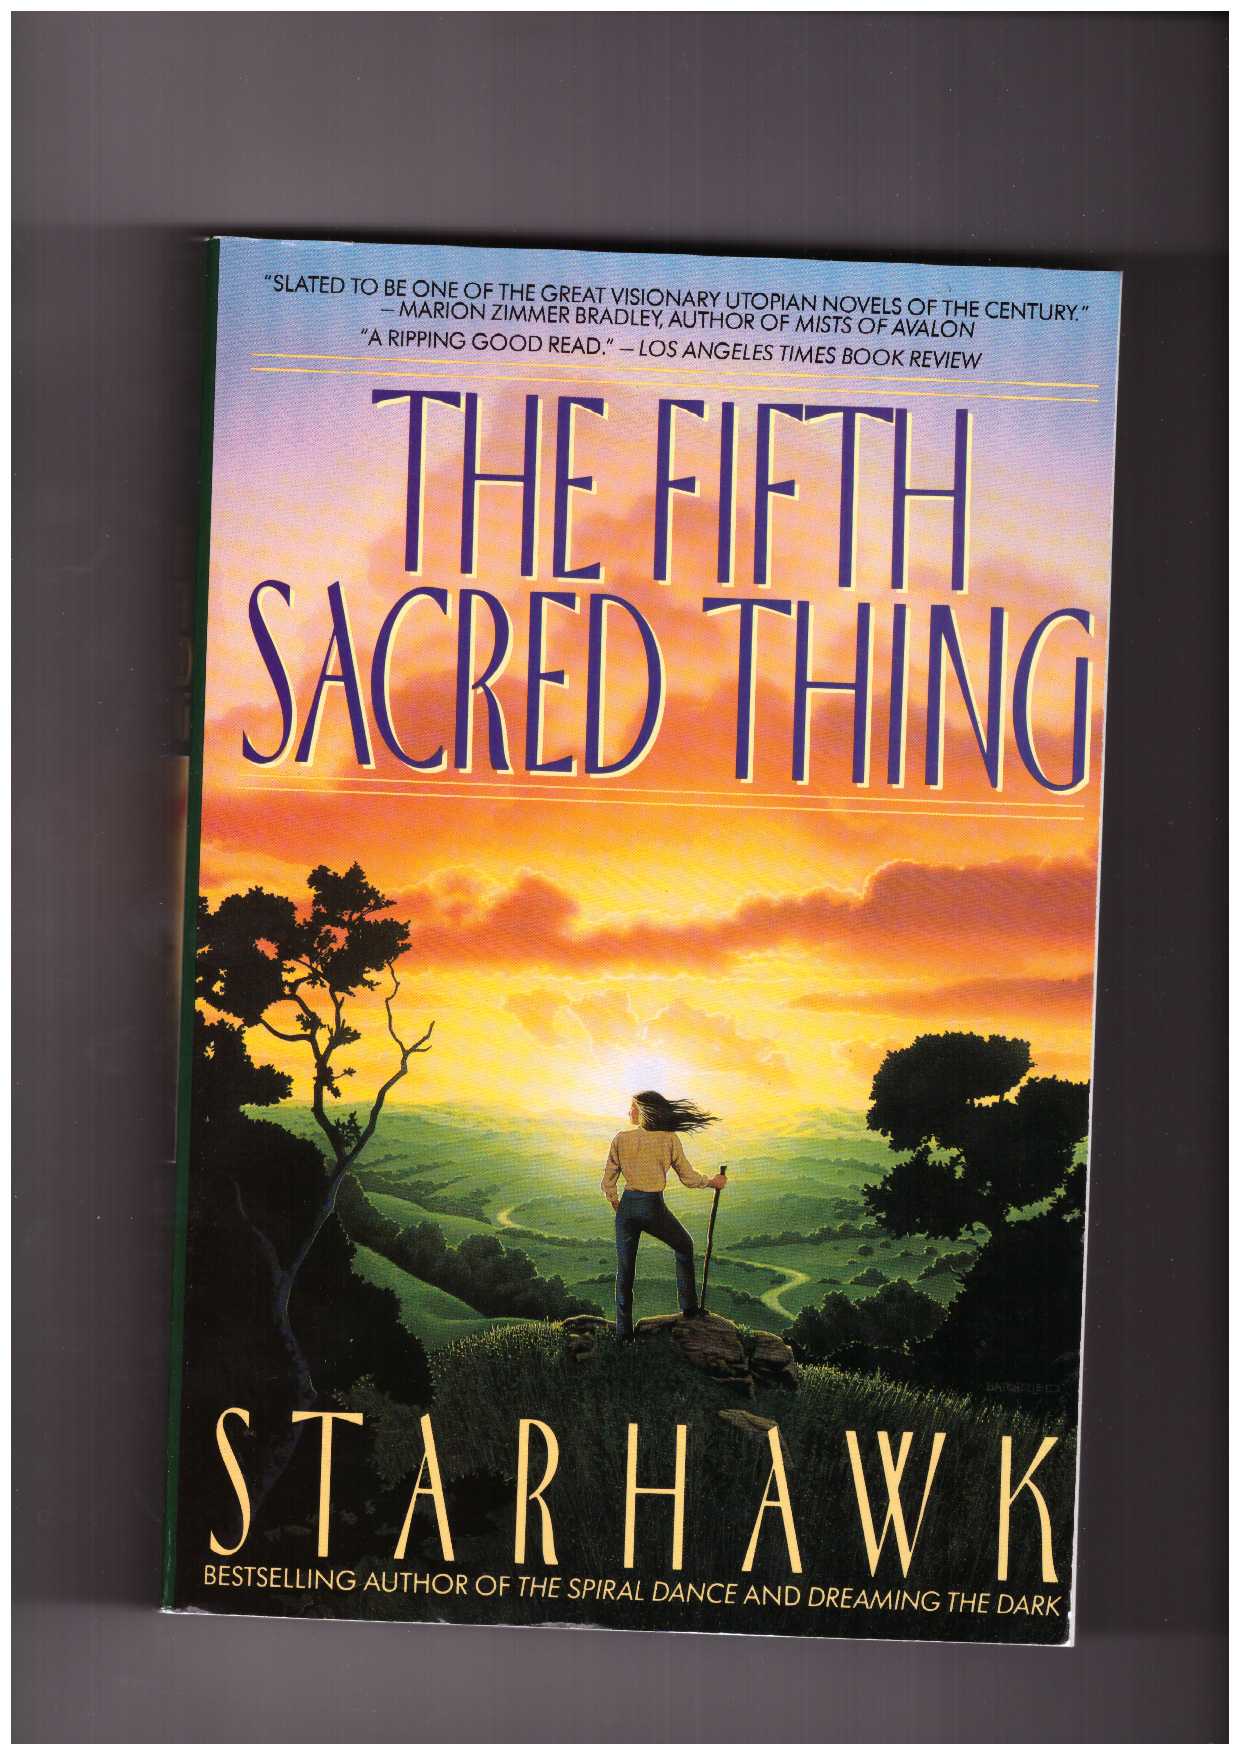 STARHAWK - The Fifth Sacred Thing